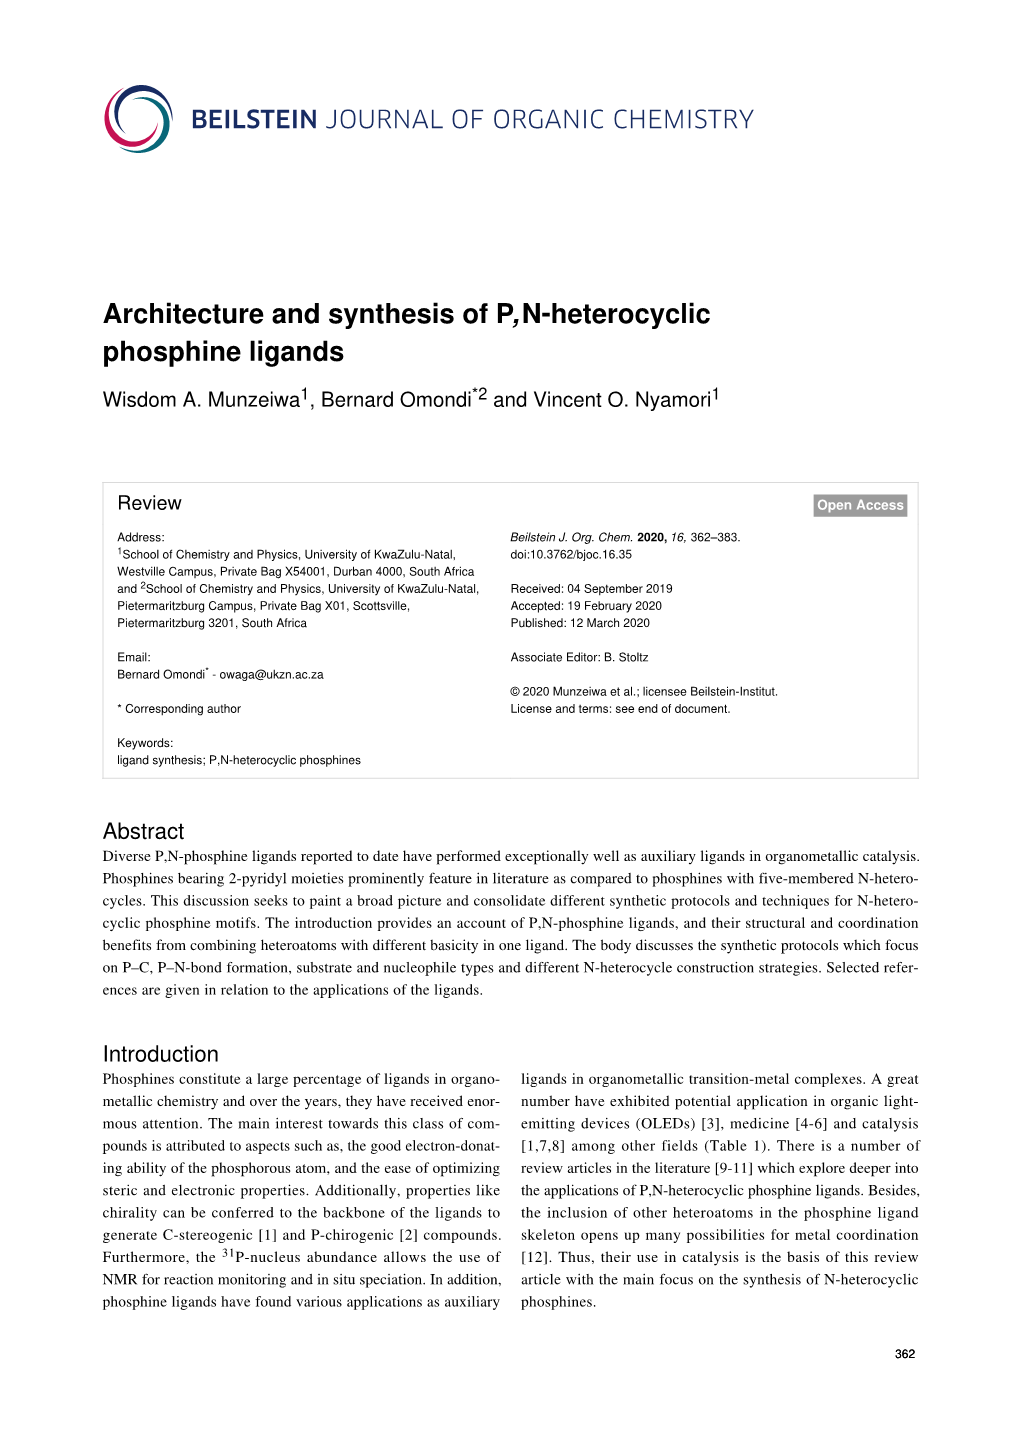 Architecture and Synthesis of P, N-Heterocyclic Phosphine Ligands